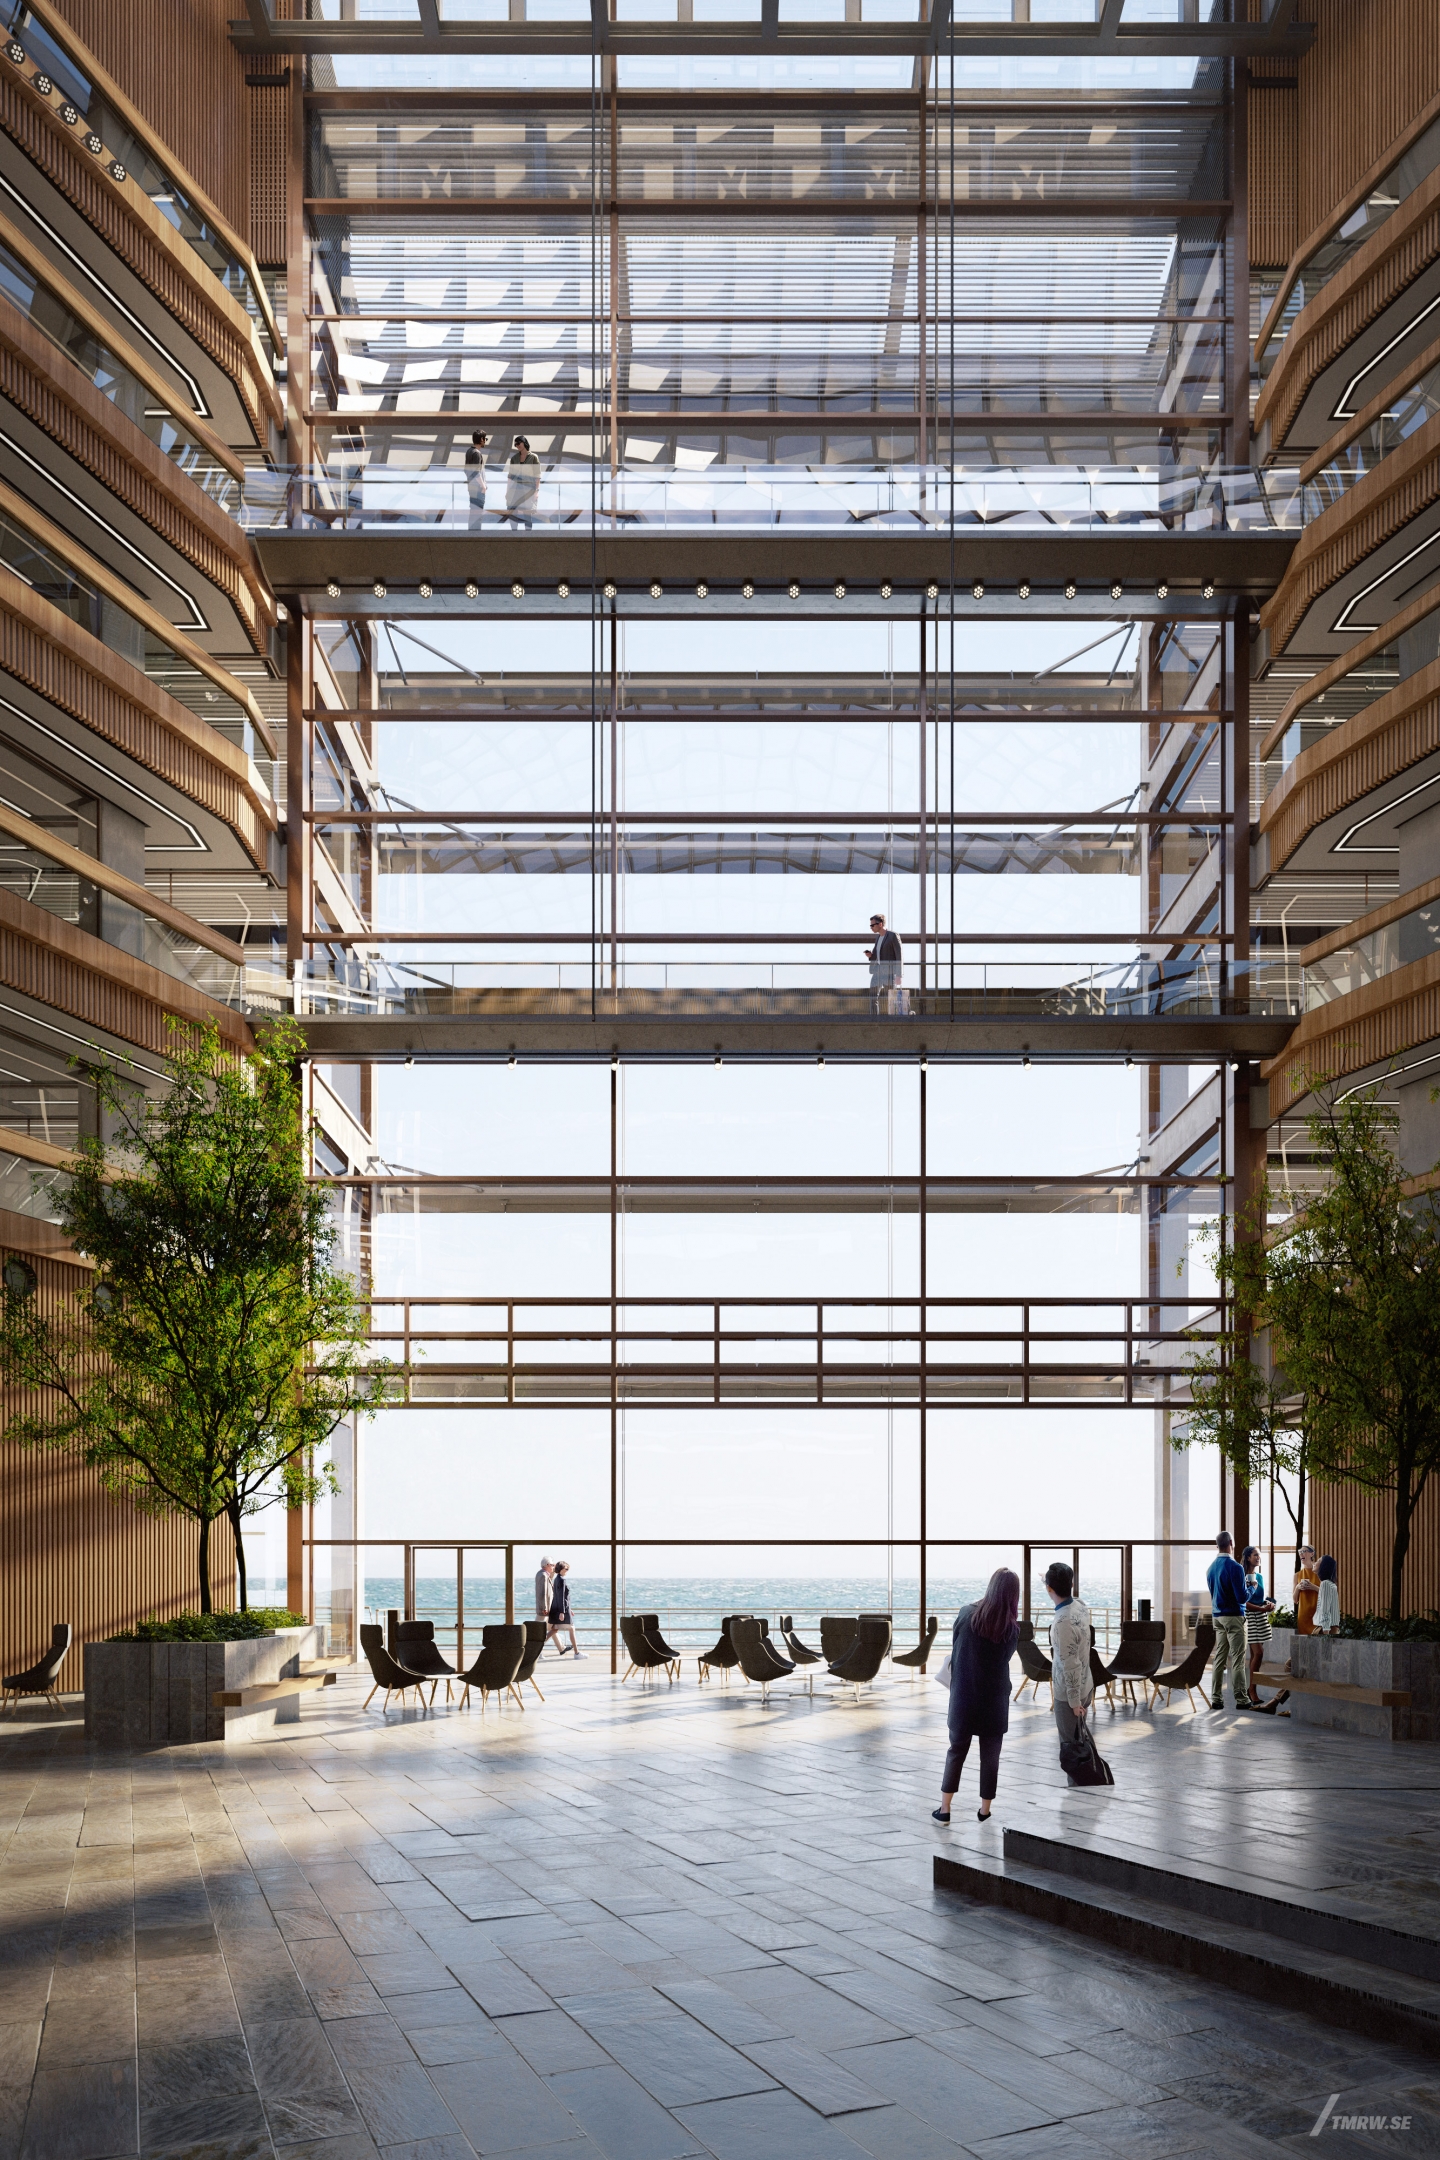 Architectural visualization of Ferring for Foster & Partners. A image of the interior in an office building with people walking around in the daylight. With a tall glass wall.